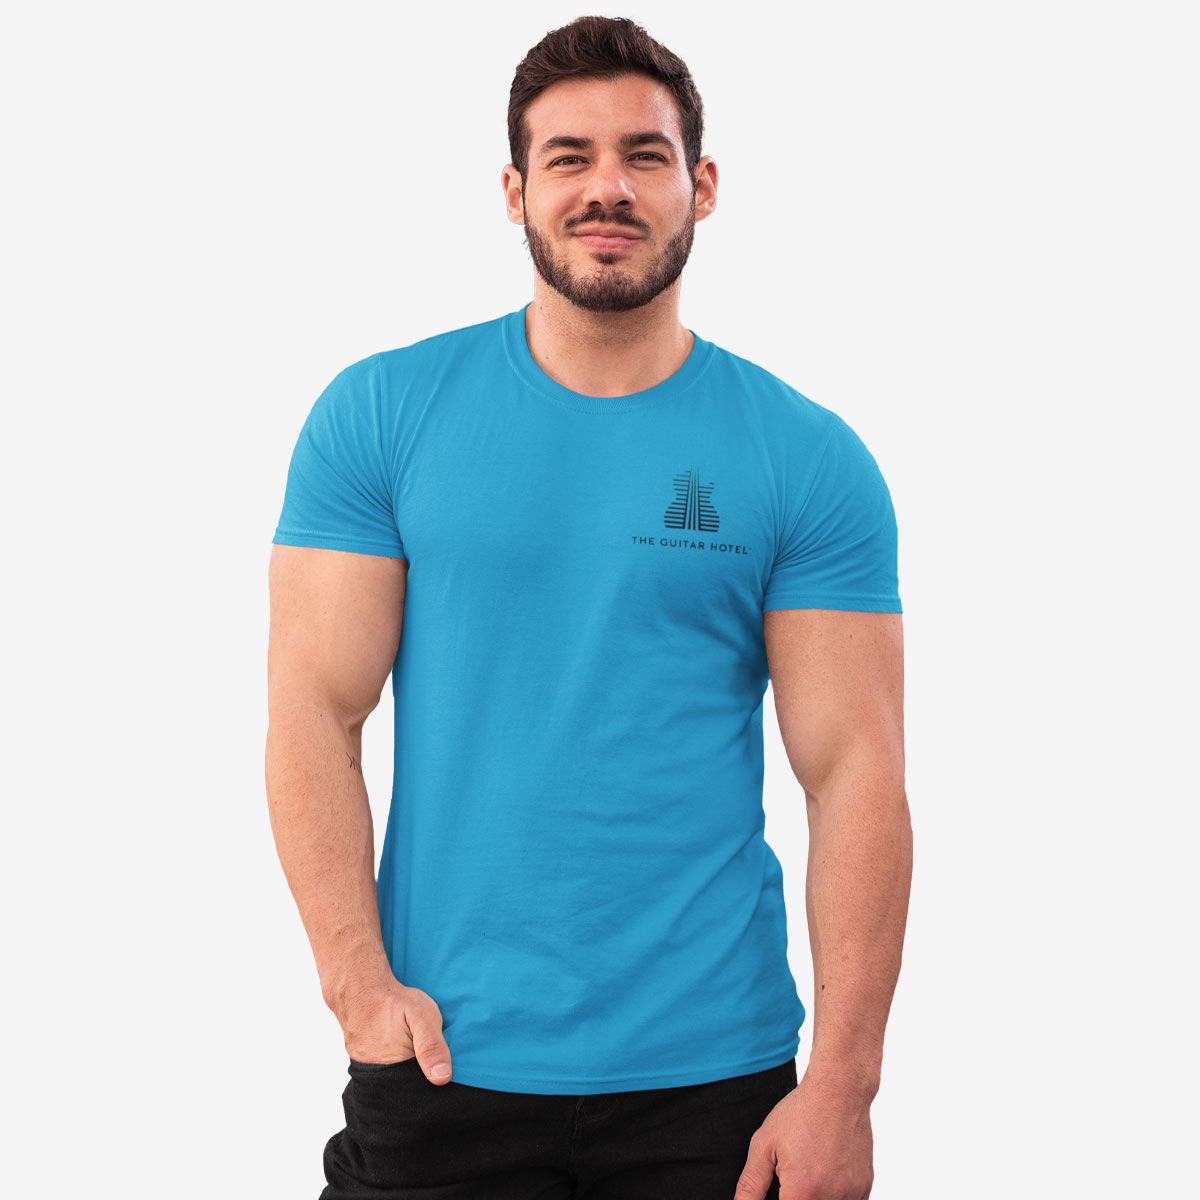 Guitar Hotel Adult Fit Tee in Aqua with Reflection Design image number 1